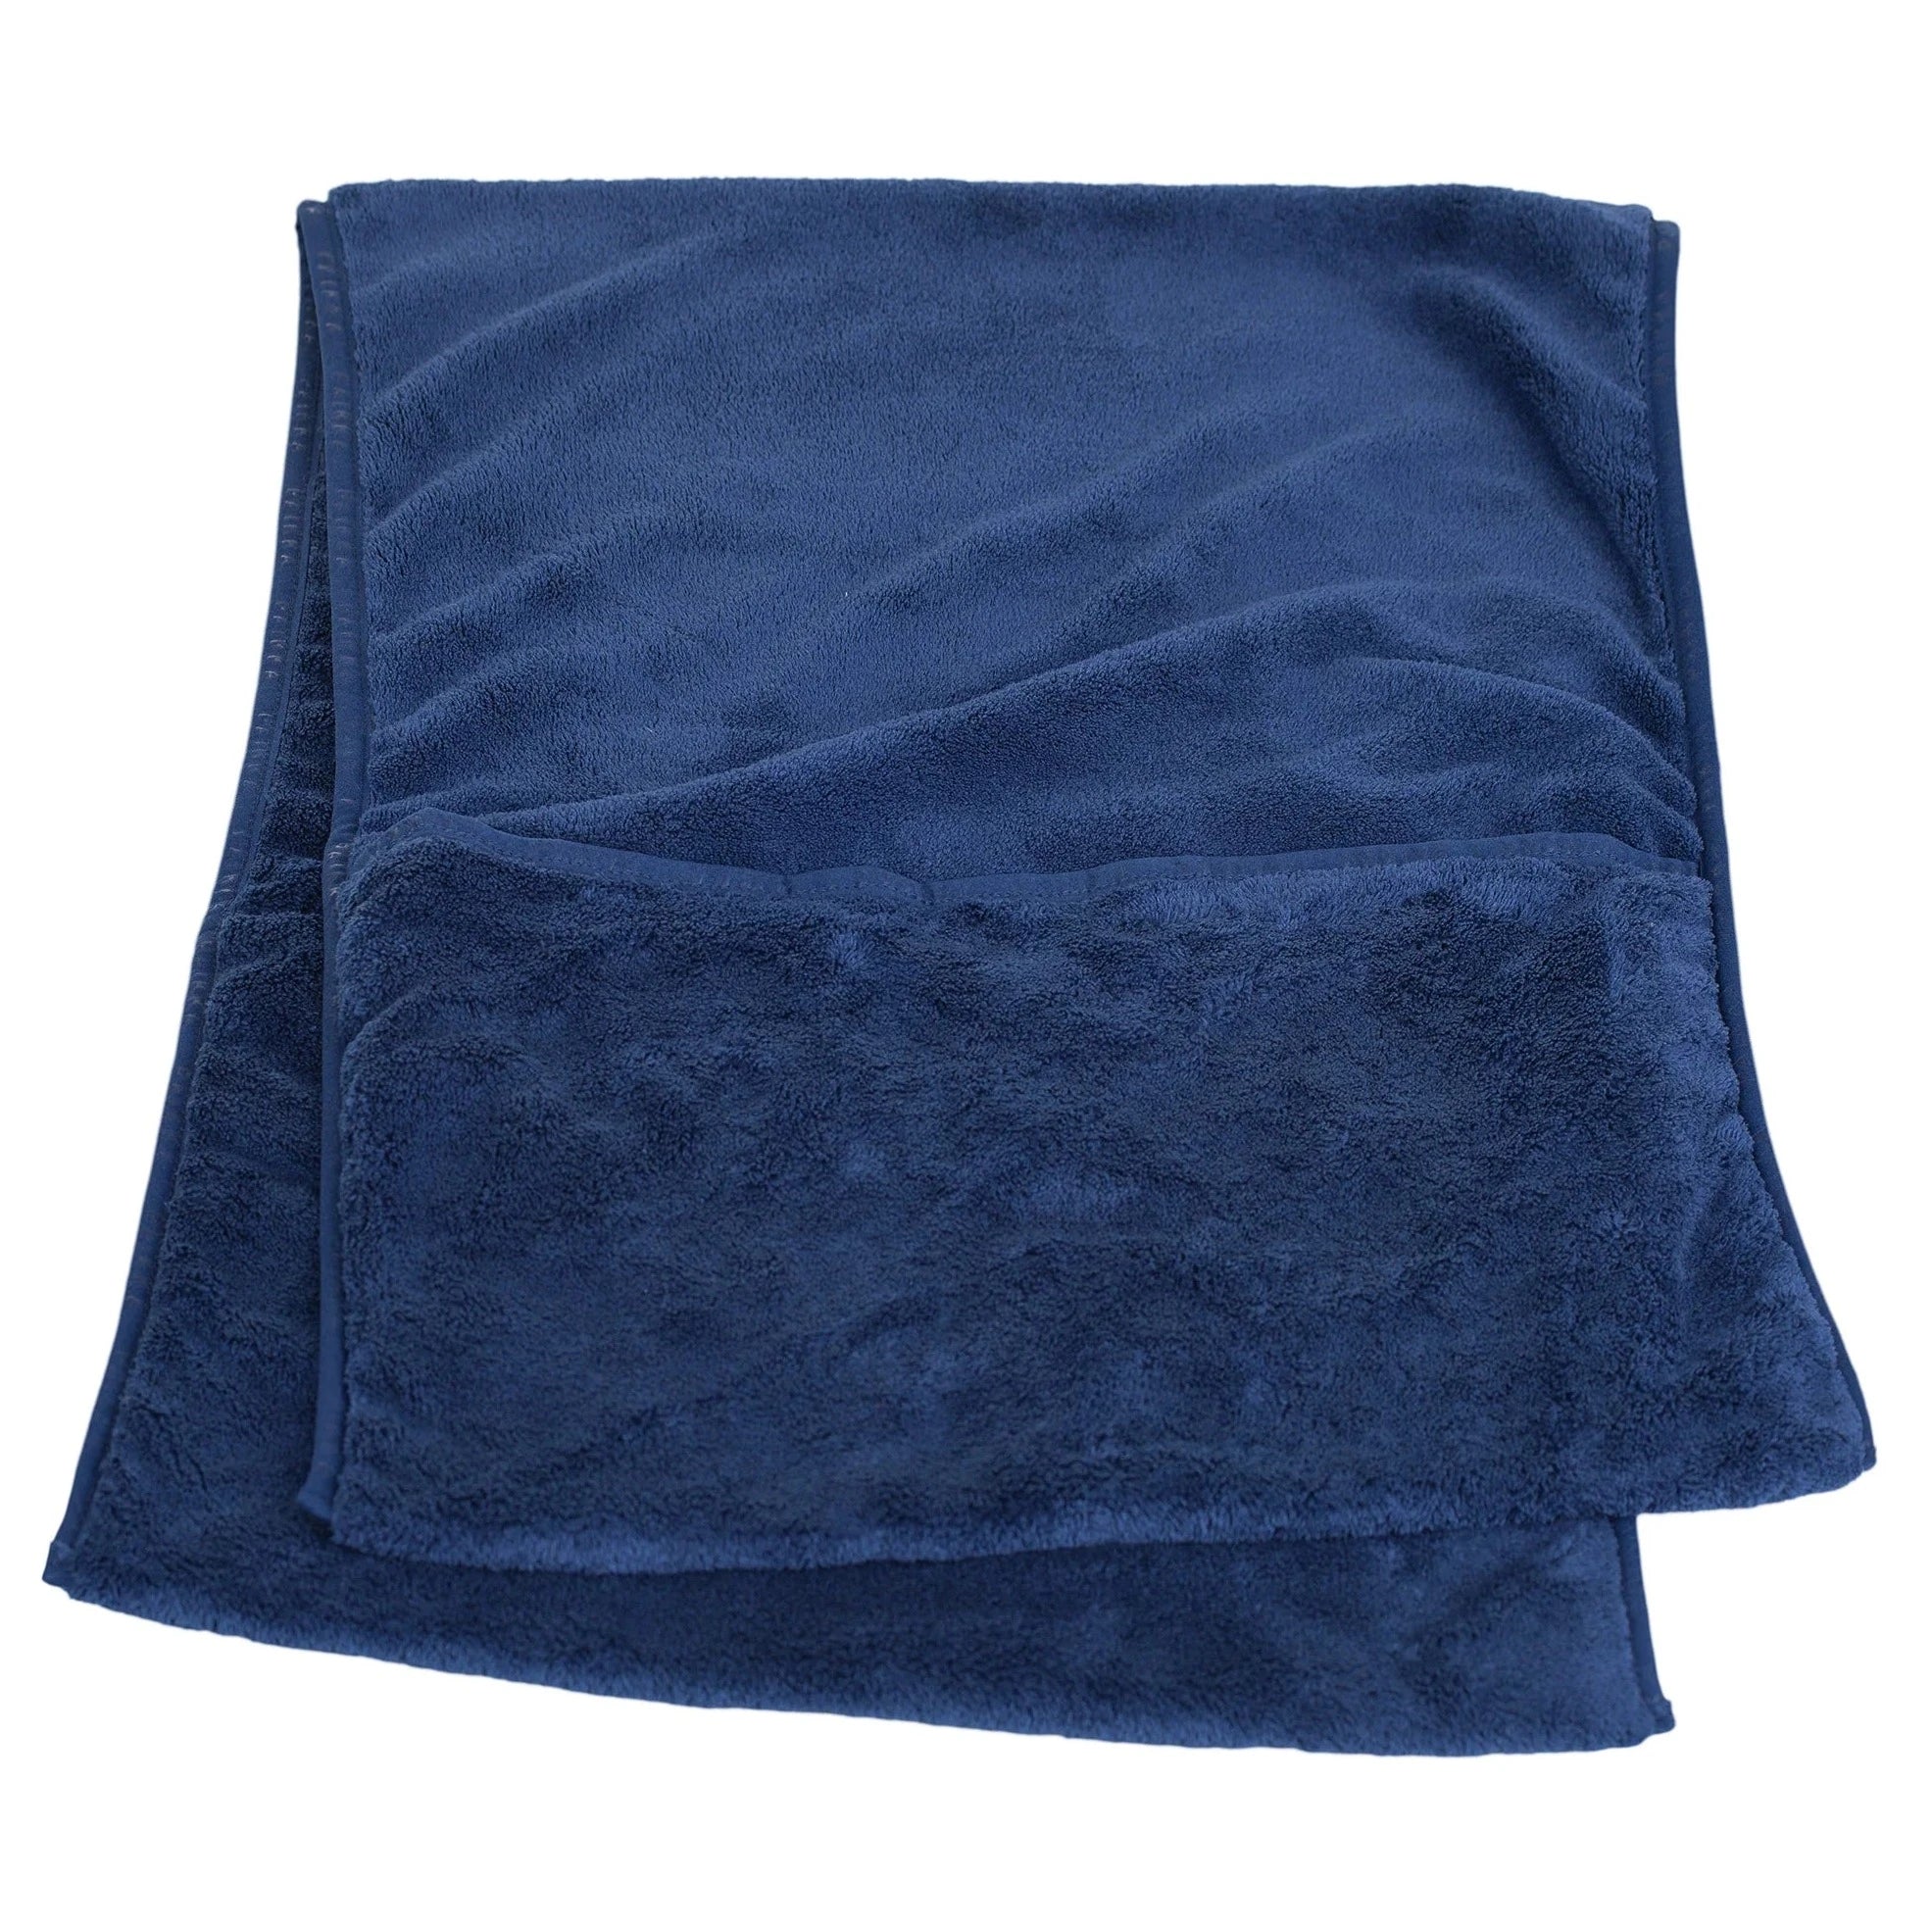 Drying Towel for Dogs 40x110cm by Paikka